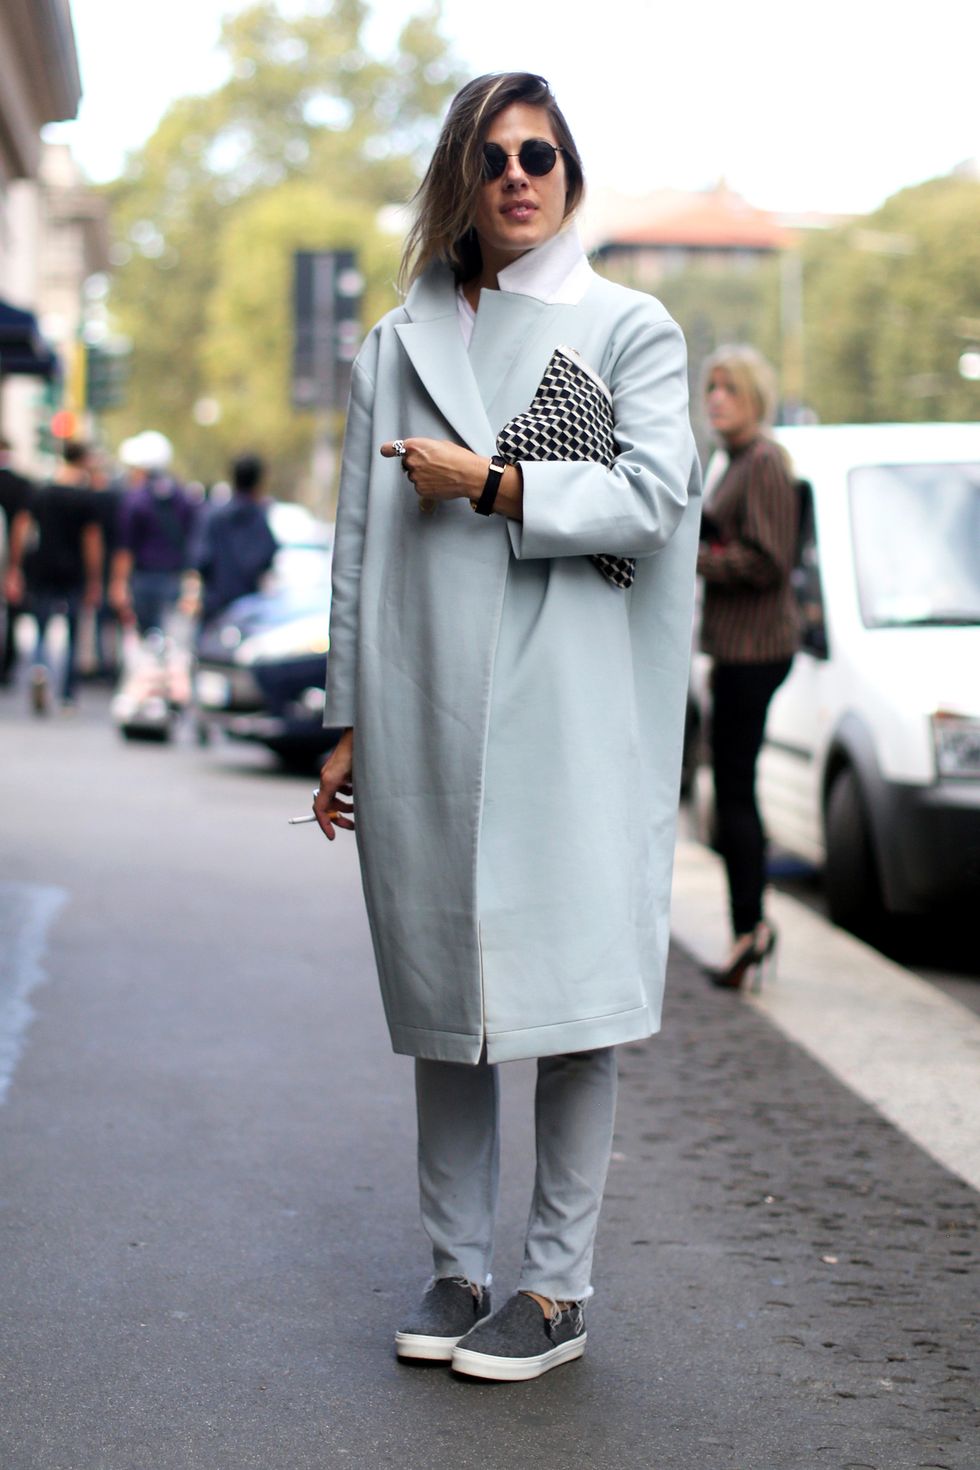 Clothing, Road, Infrastructure, Street, Outerwear, White, Street fashion, Style, Coat, Sunglasses, 